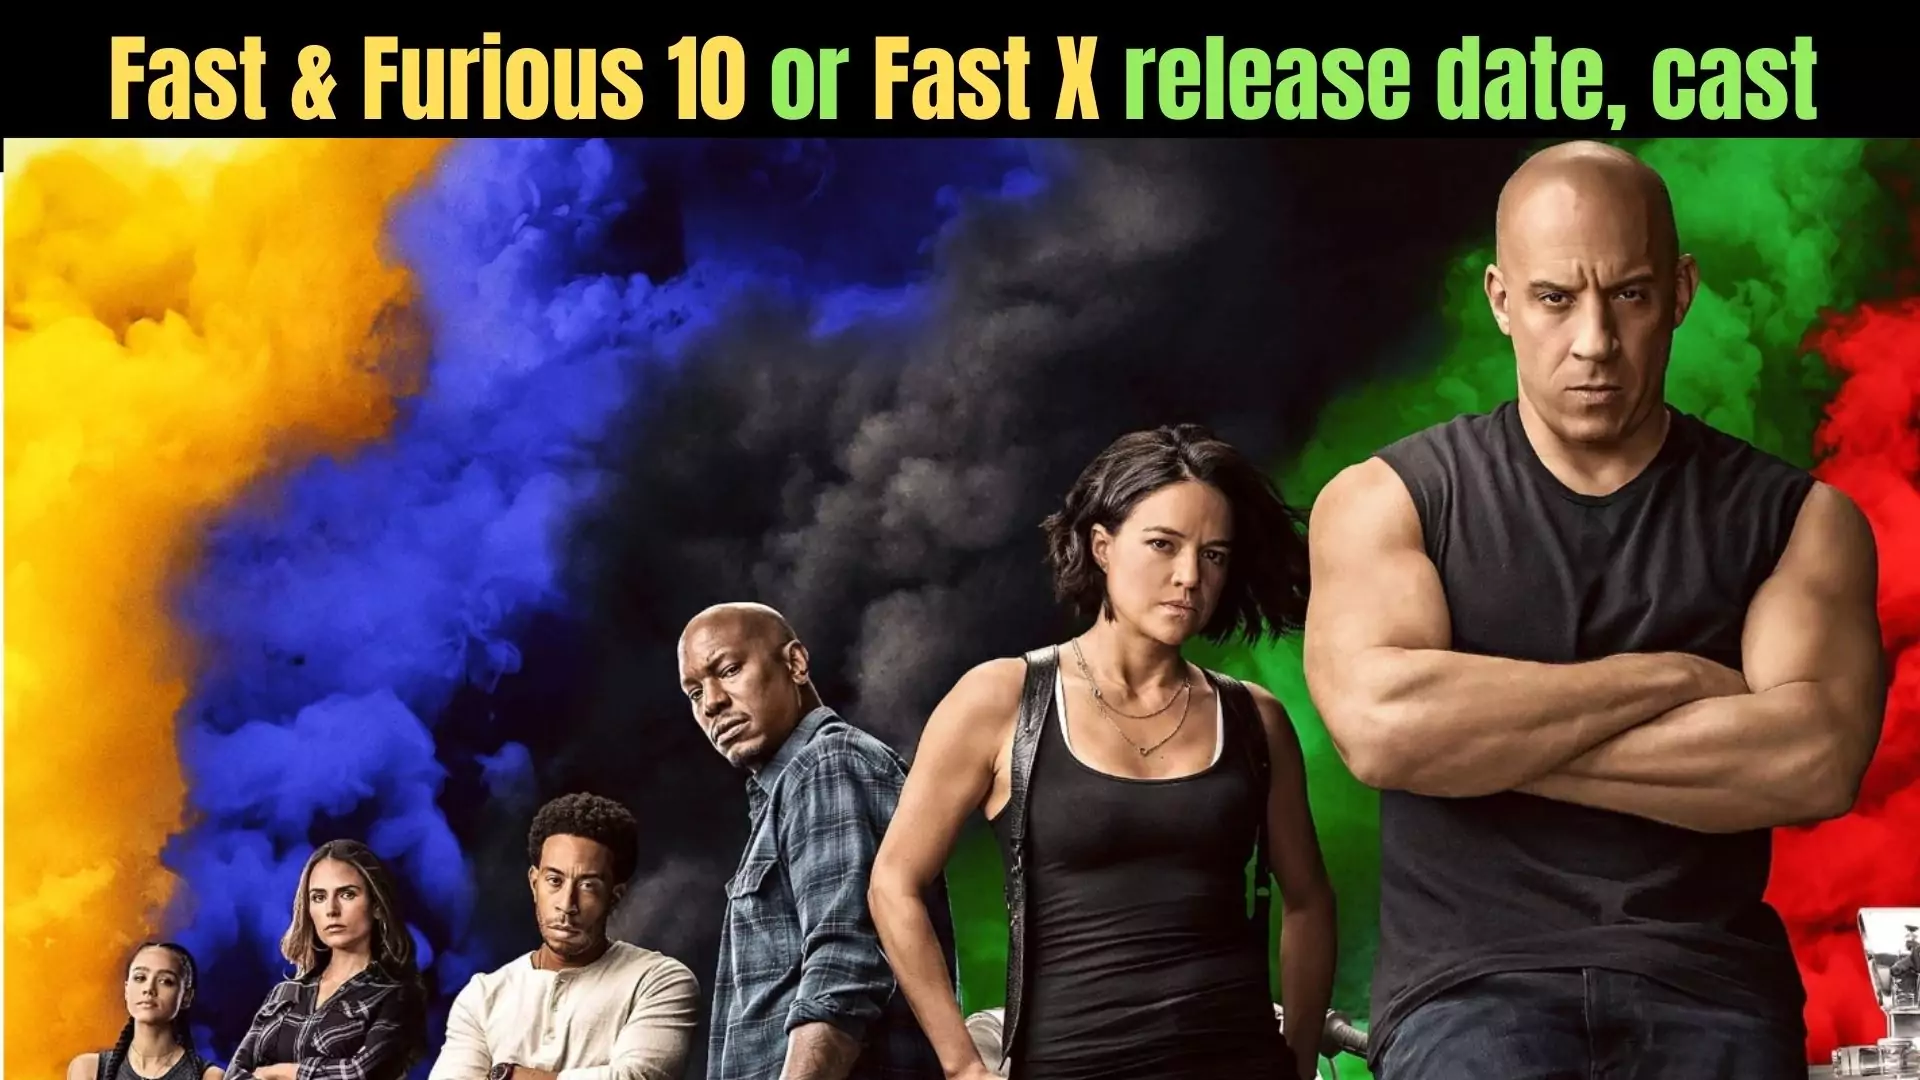 Fast & Furious Franchise upcoming Fast 10 release date, cast, and more